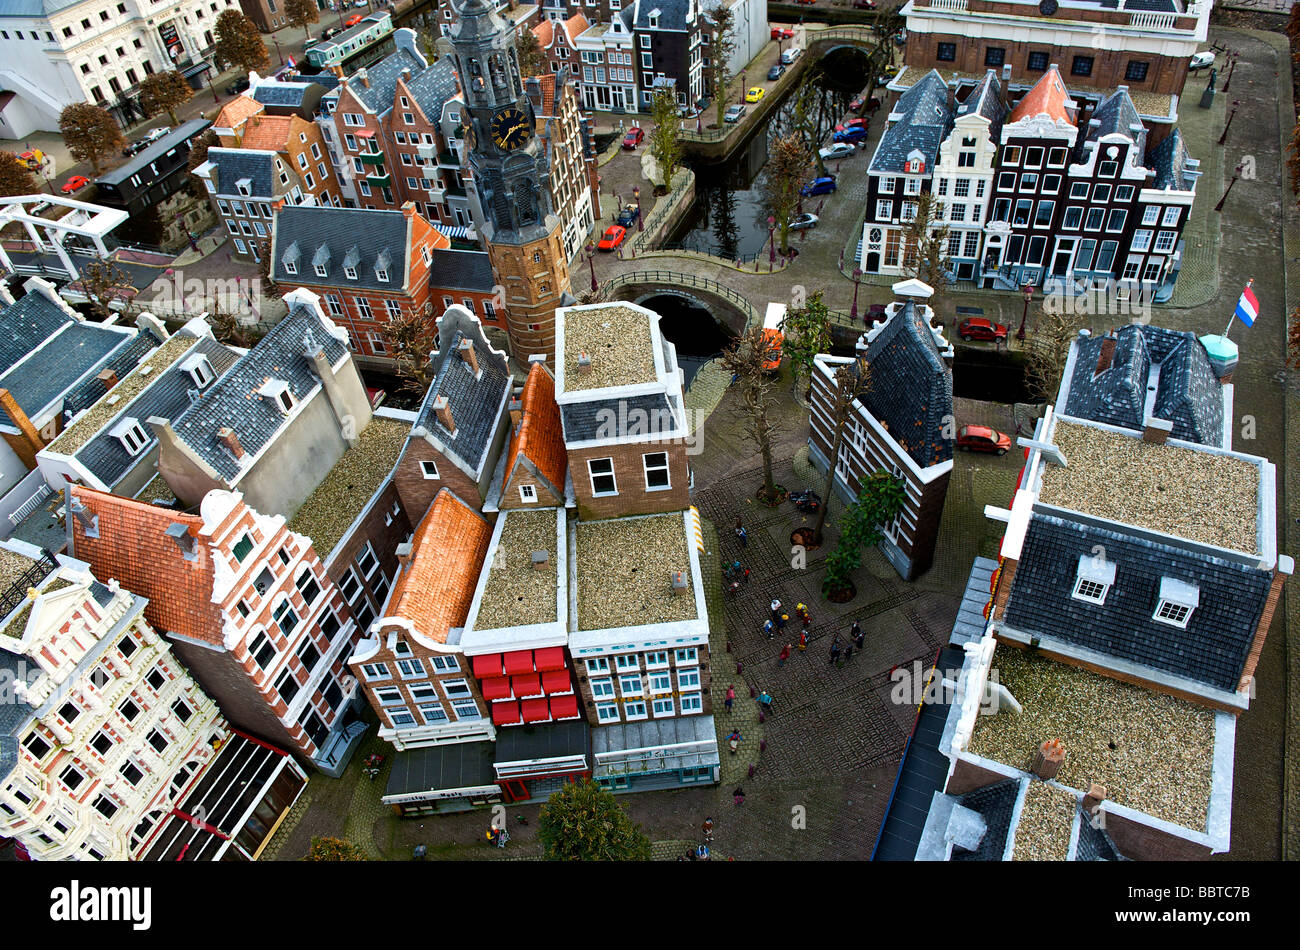 Typical Dutch historic city centre and monumental houses Stock Photo